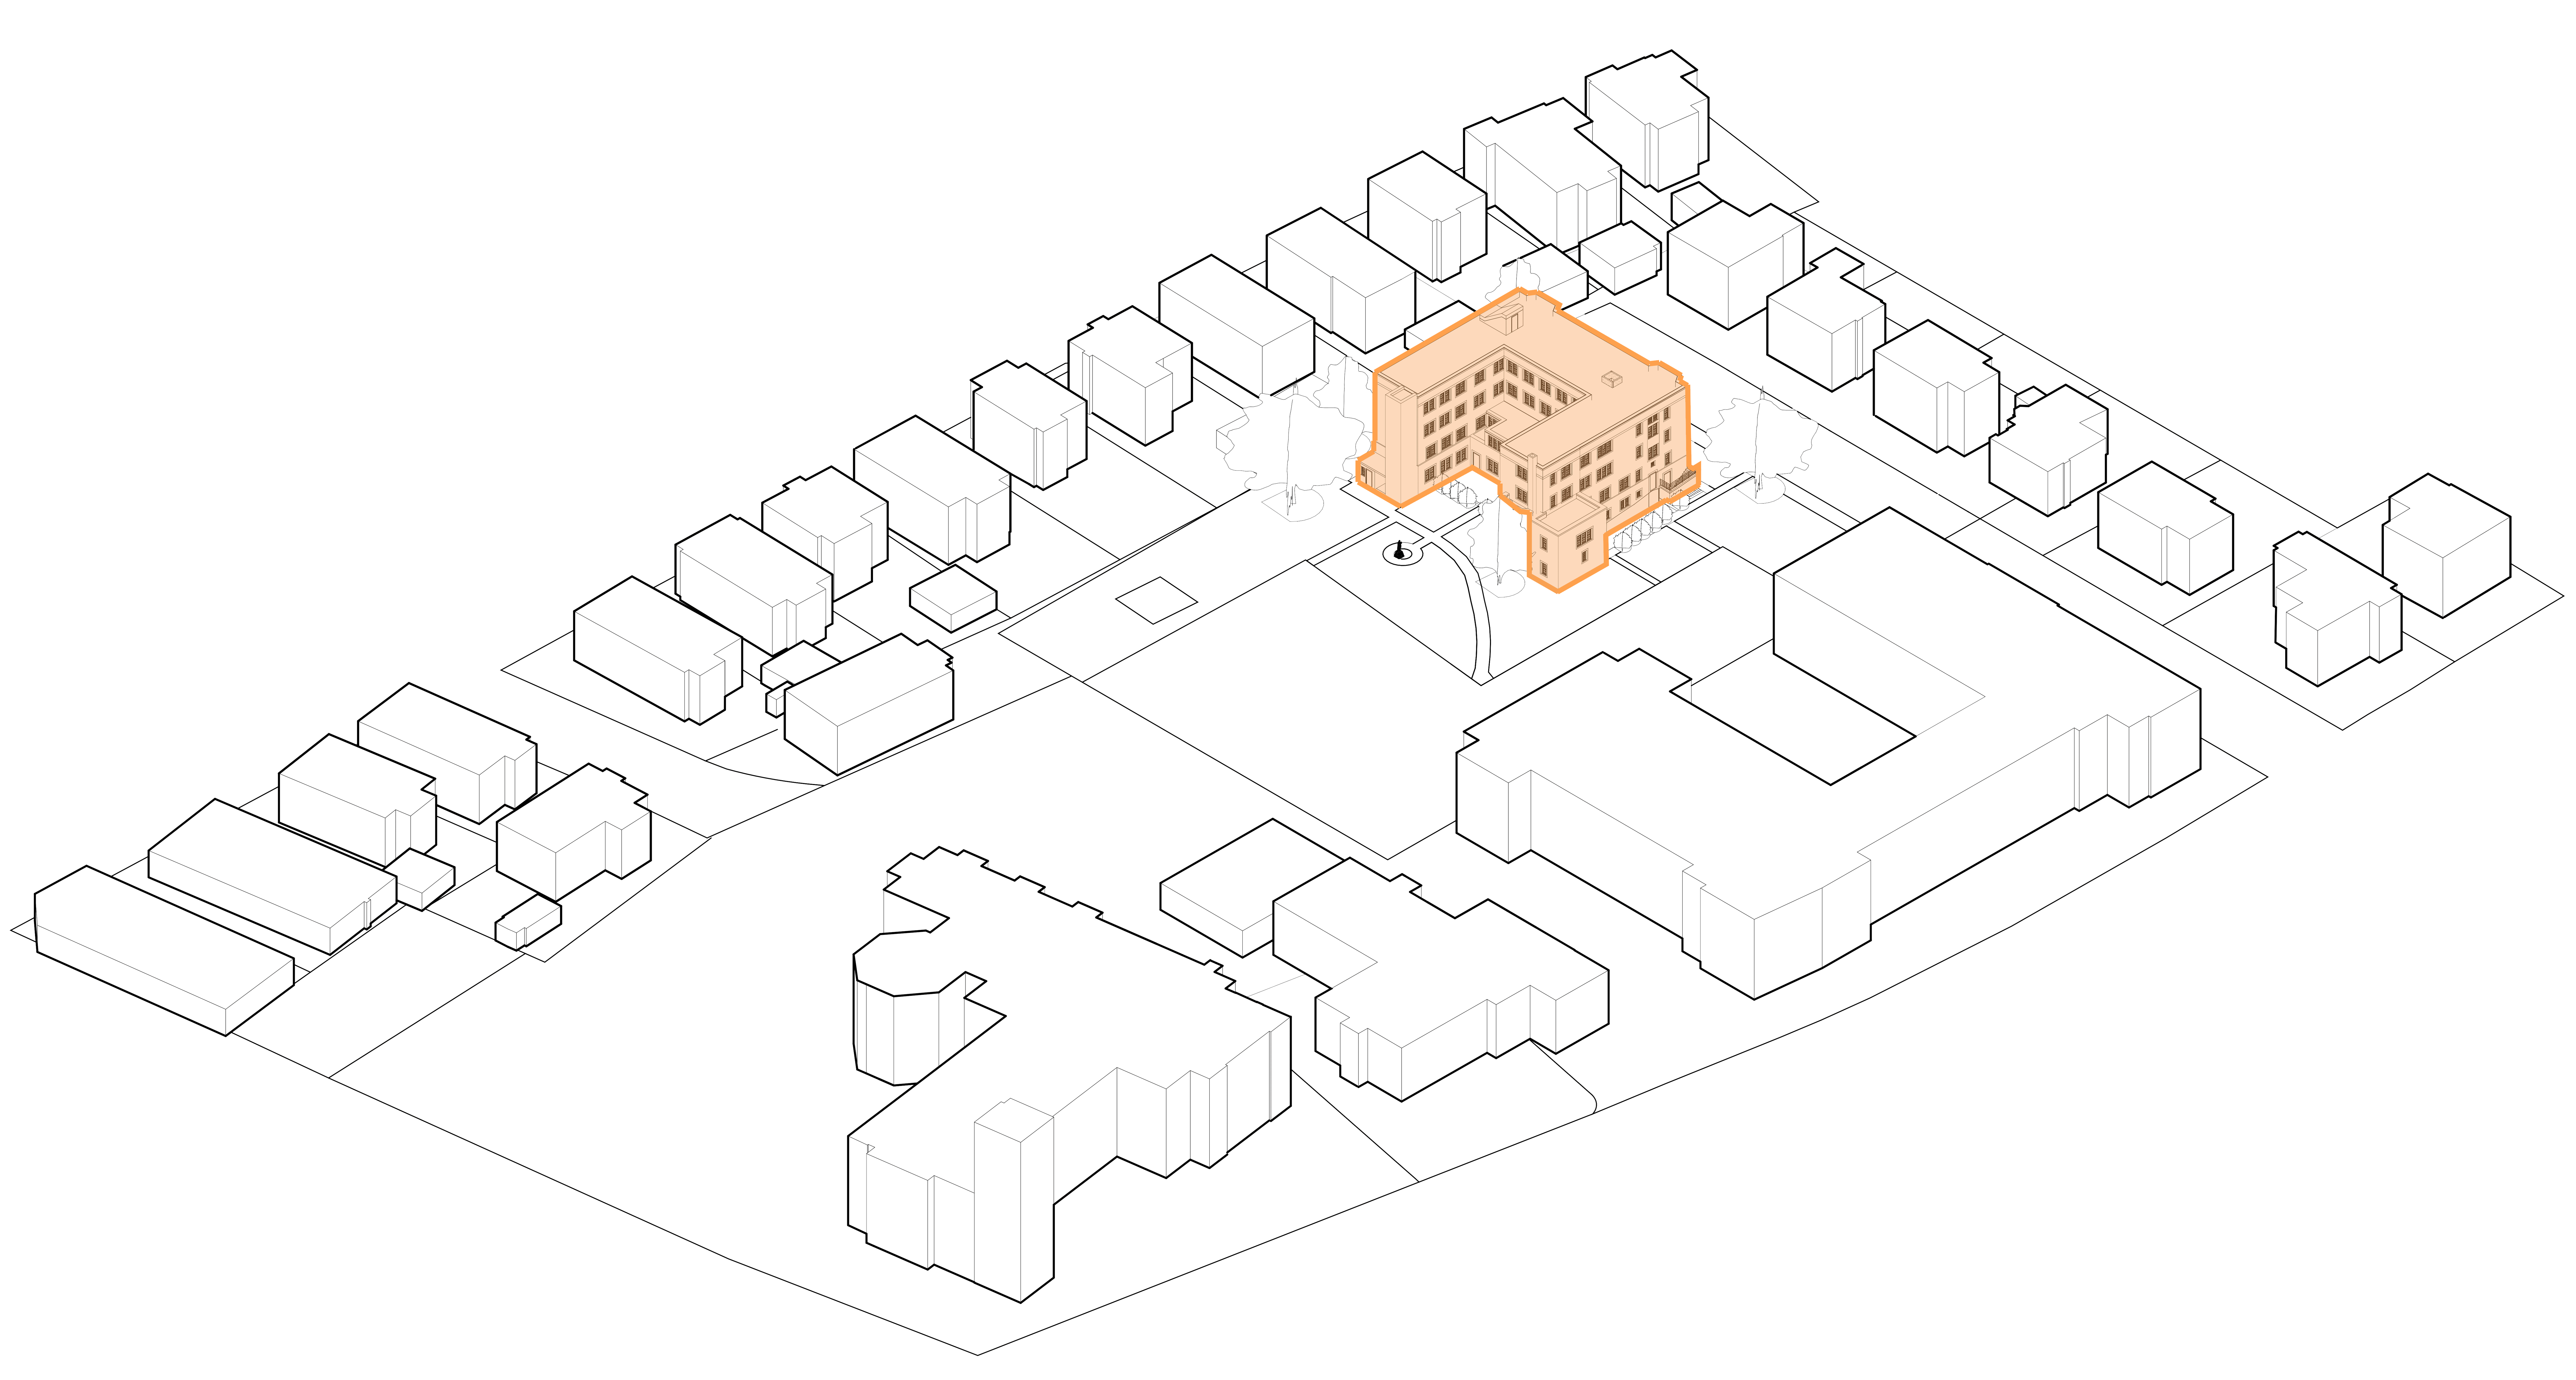 Gif depicting site development and adaptation of an existing structure for new use. 